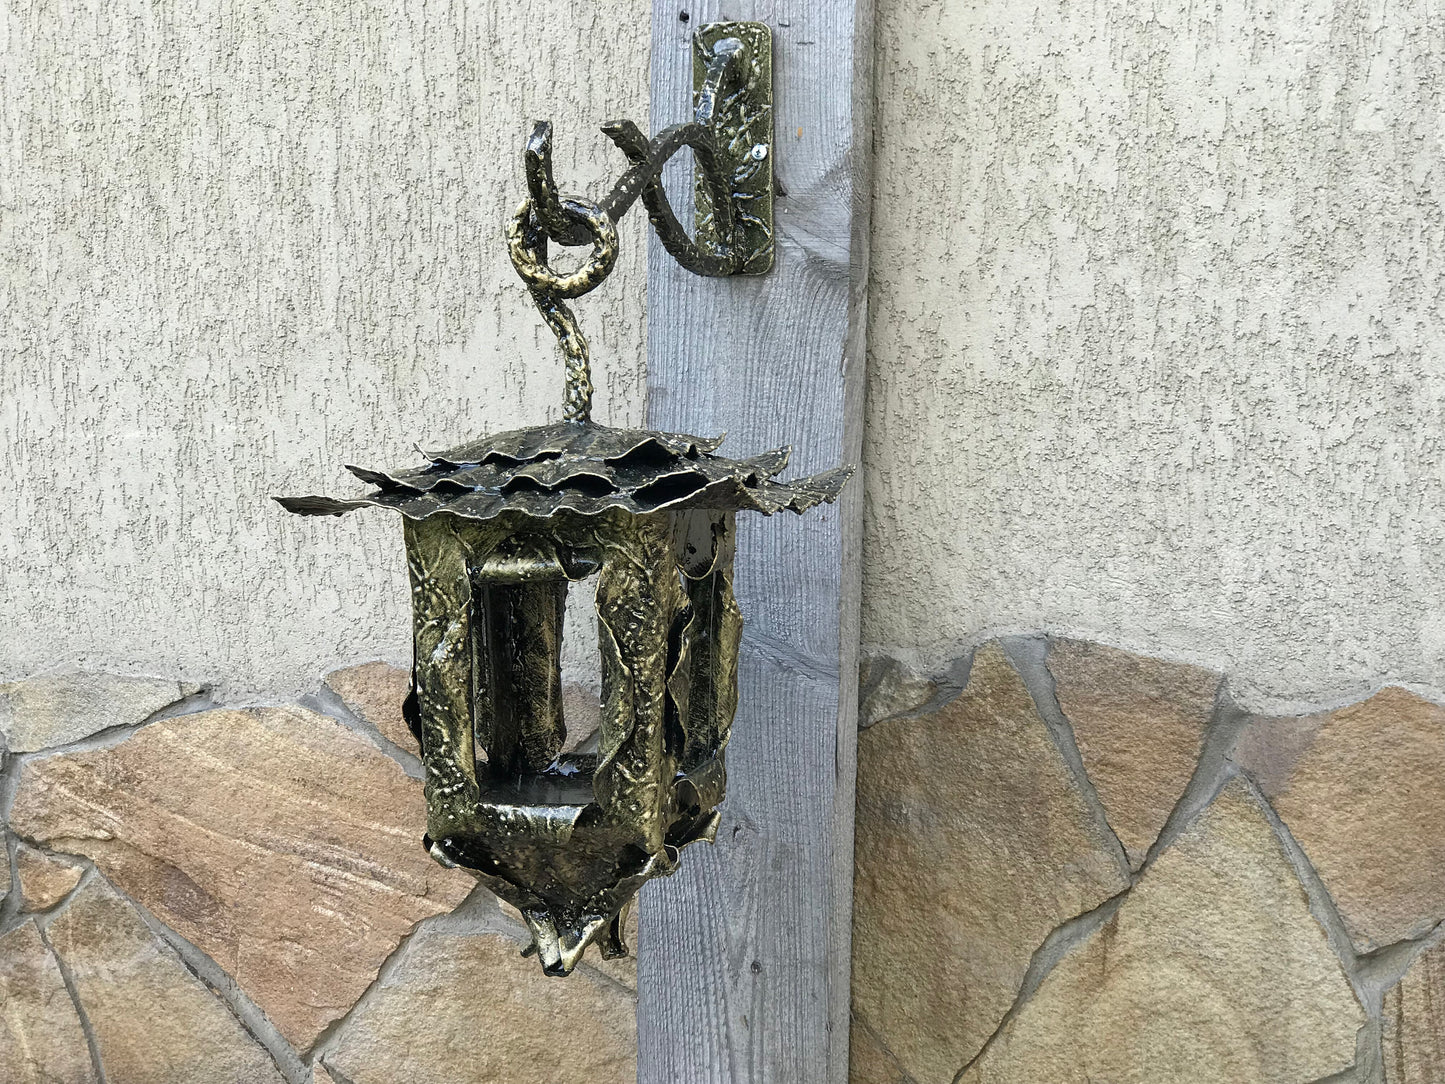 Wall sconce, candle sconce, candle holder, candle holder for wall, candle sconce for wall, candle stick, candlestick holder, candle stand